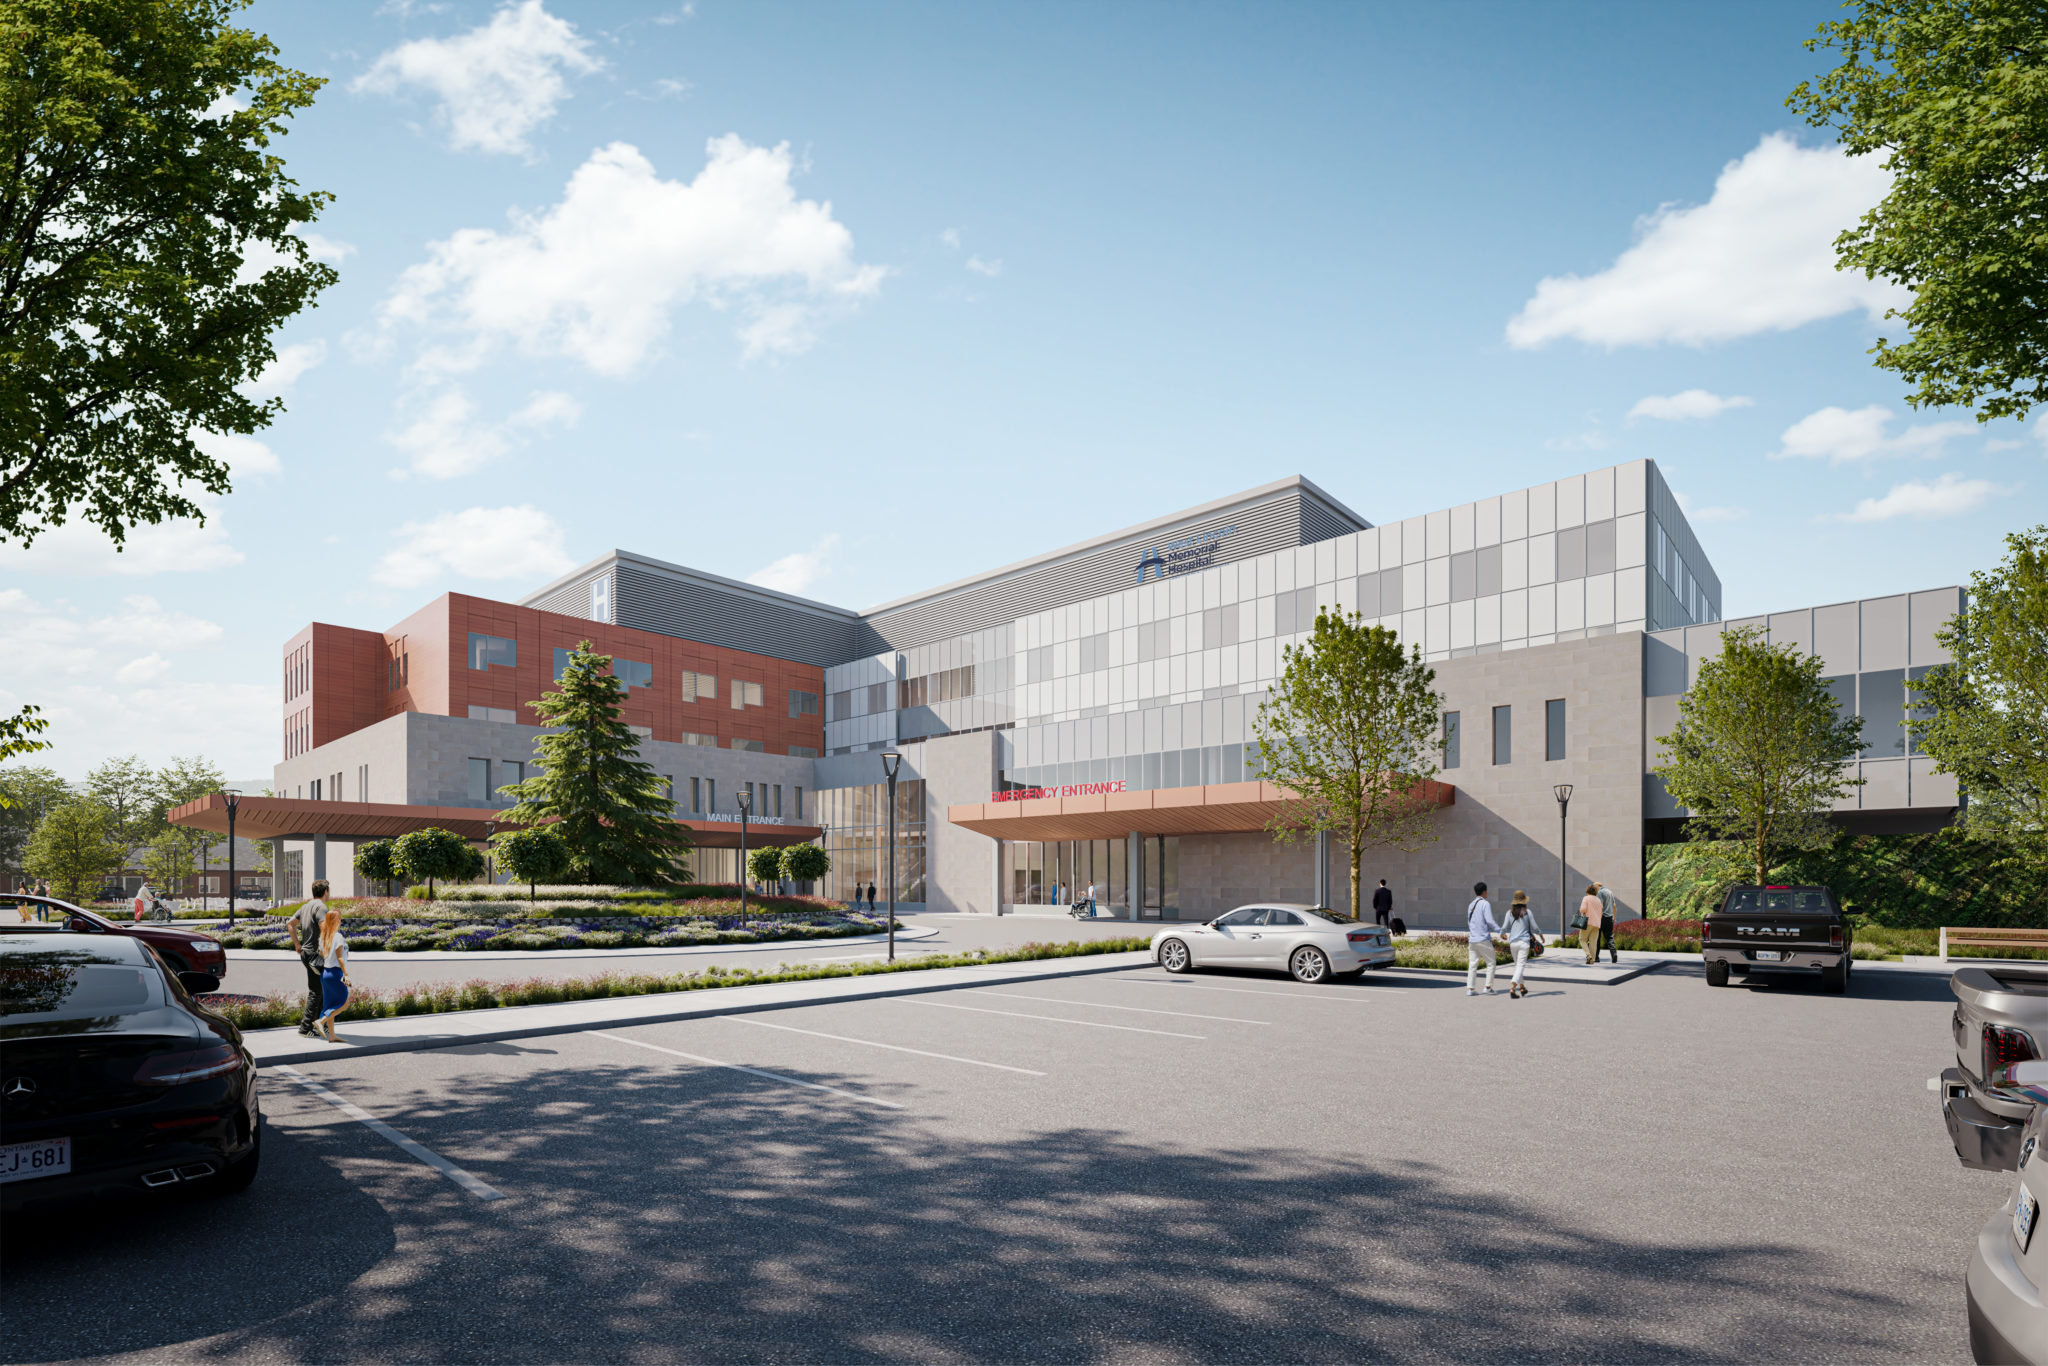 Teams submit technical RFPs for new WLMH